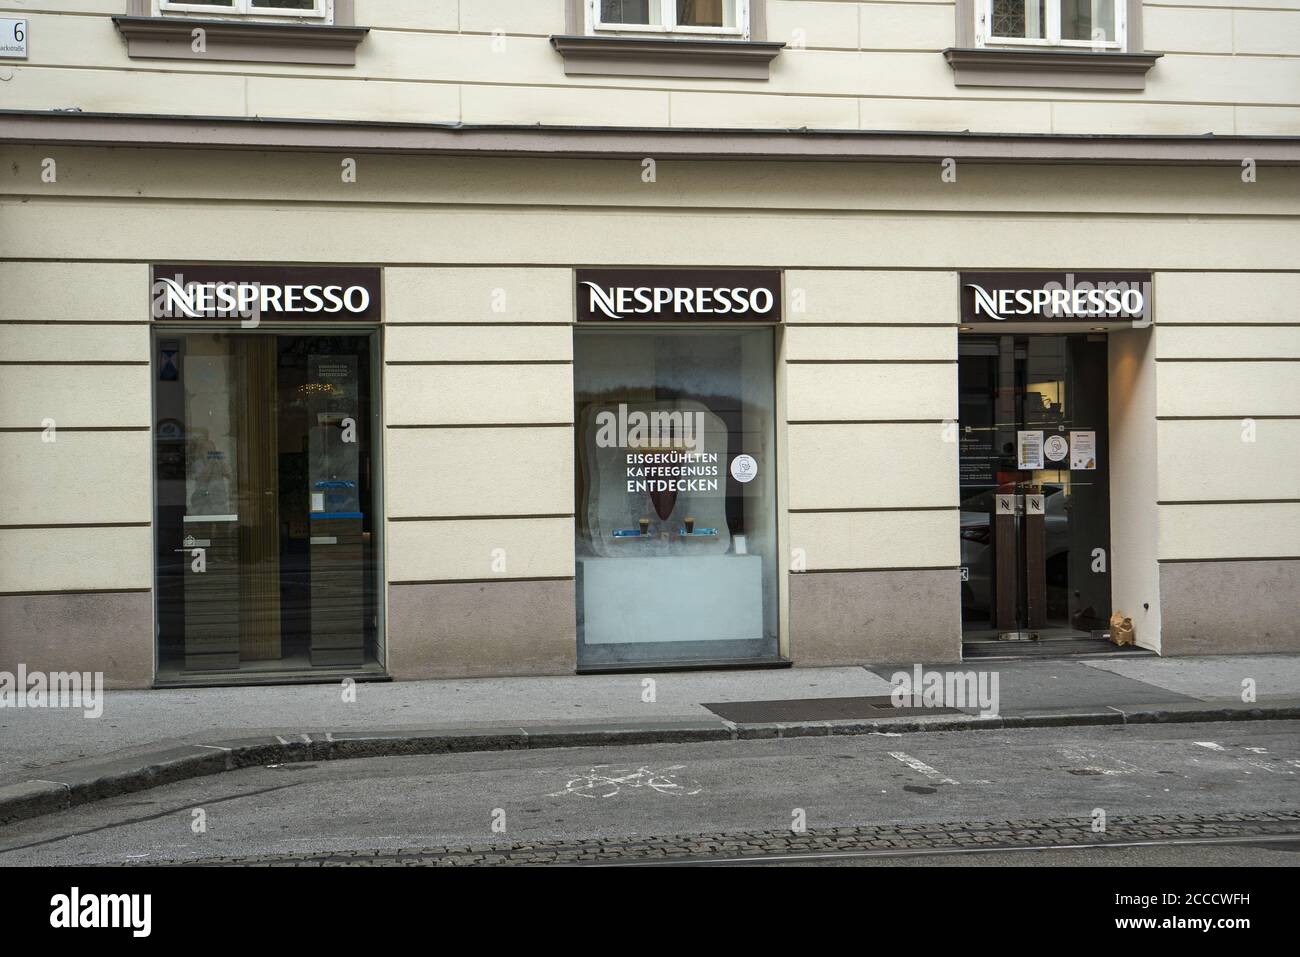 Nespresso Shop Window High Resolution Stock Photography and Images - Alamy